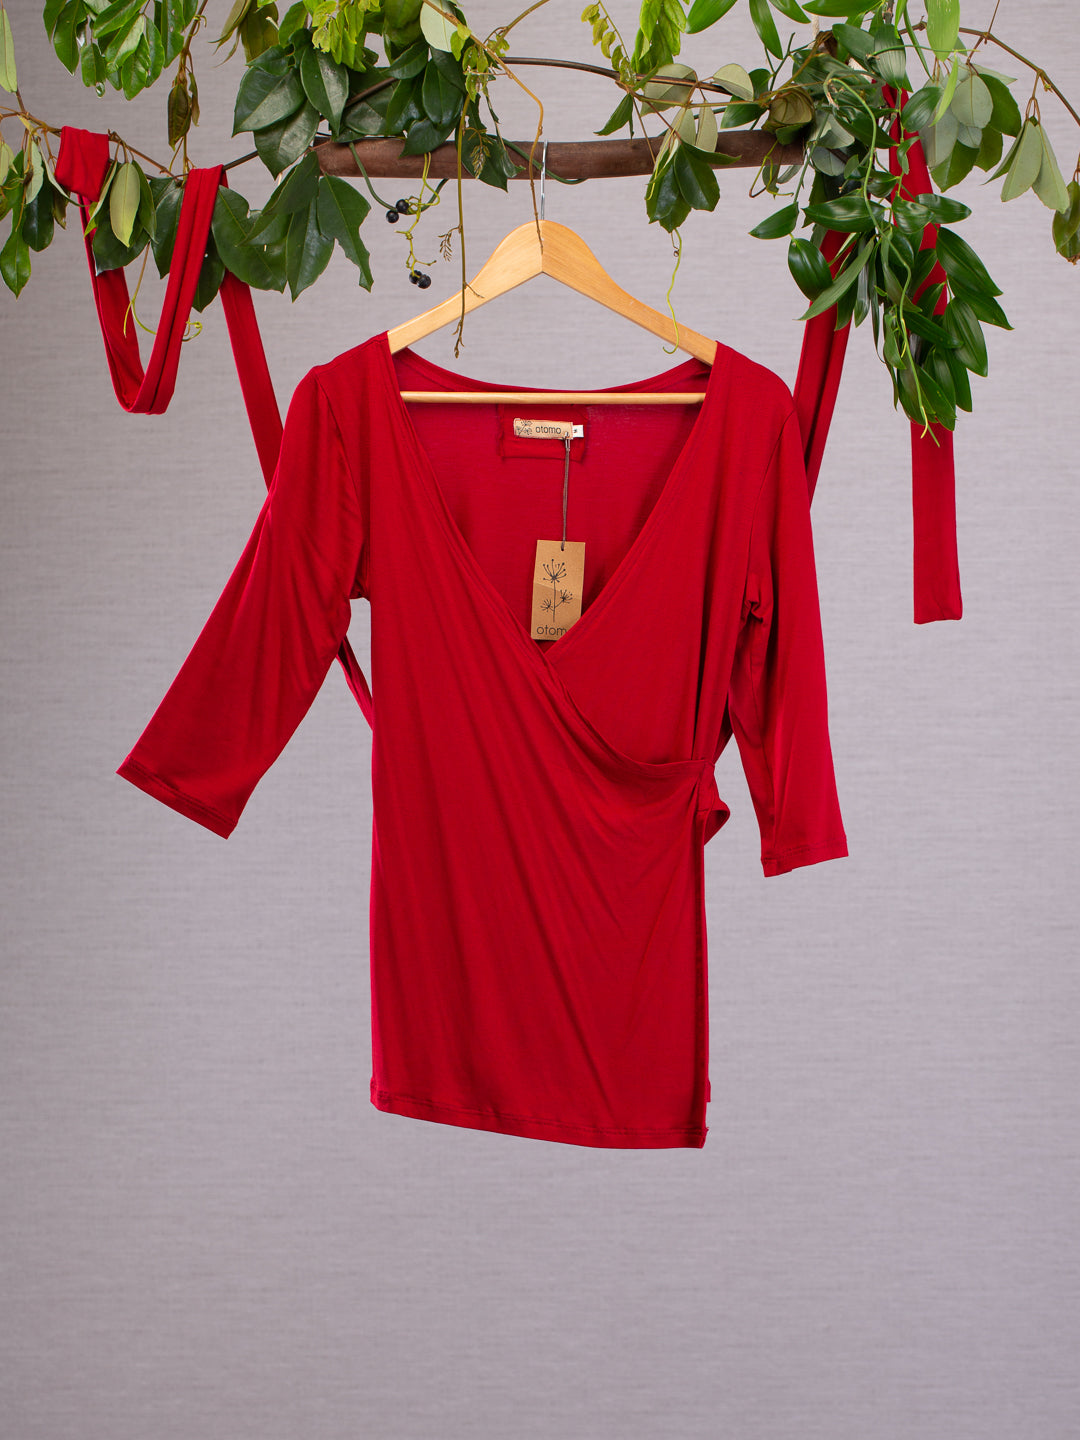 Red wrap-around top with long sashes on a hanger.